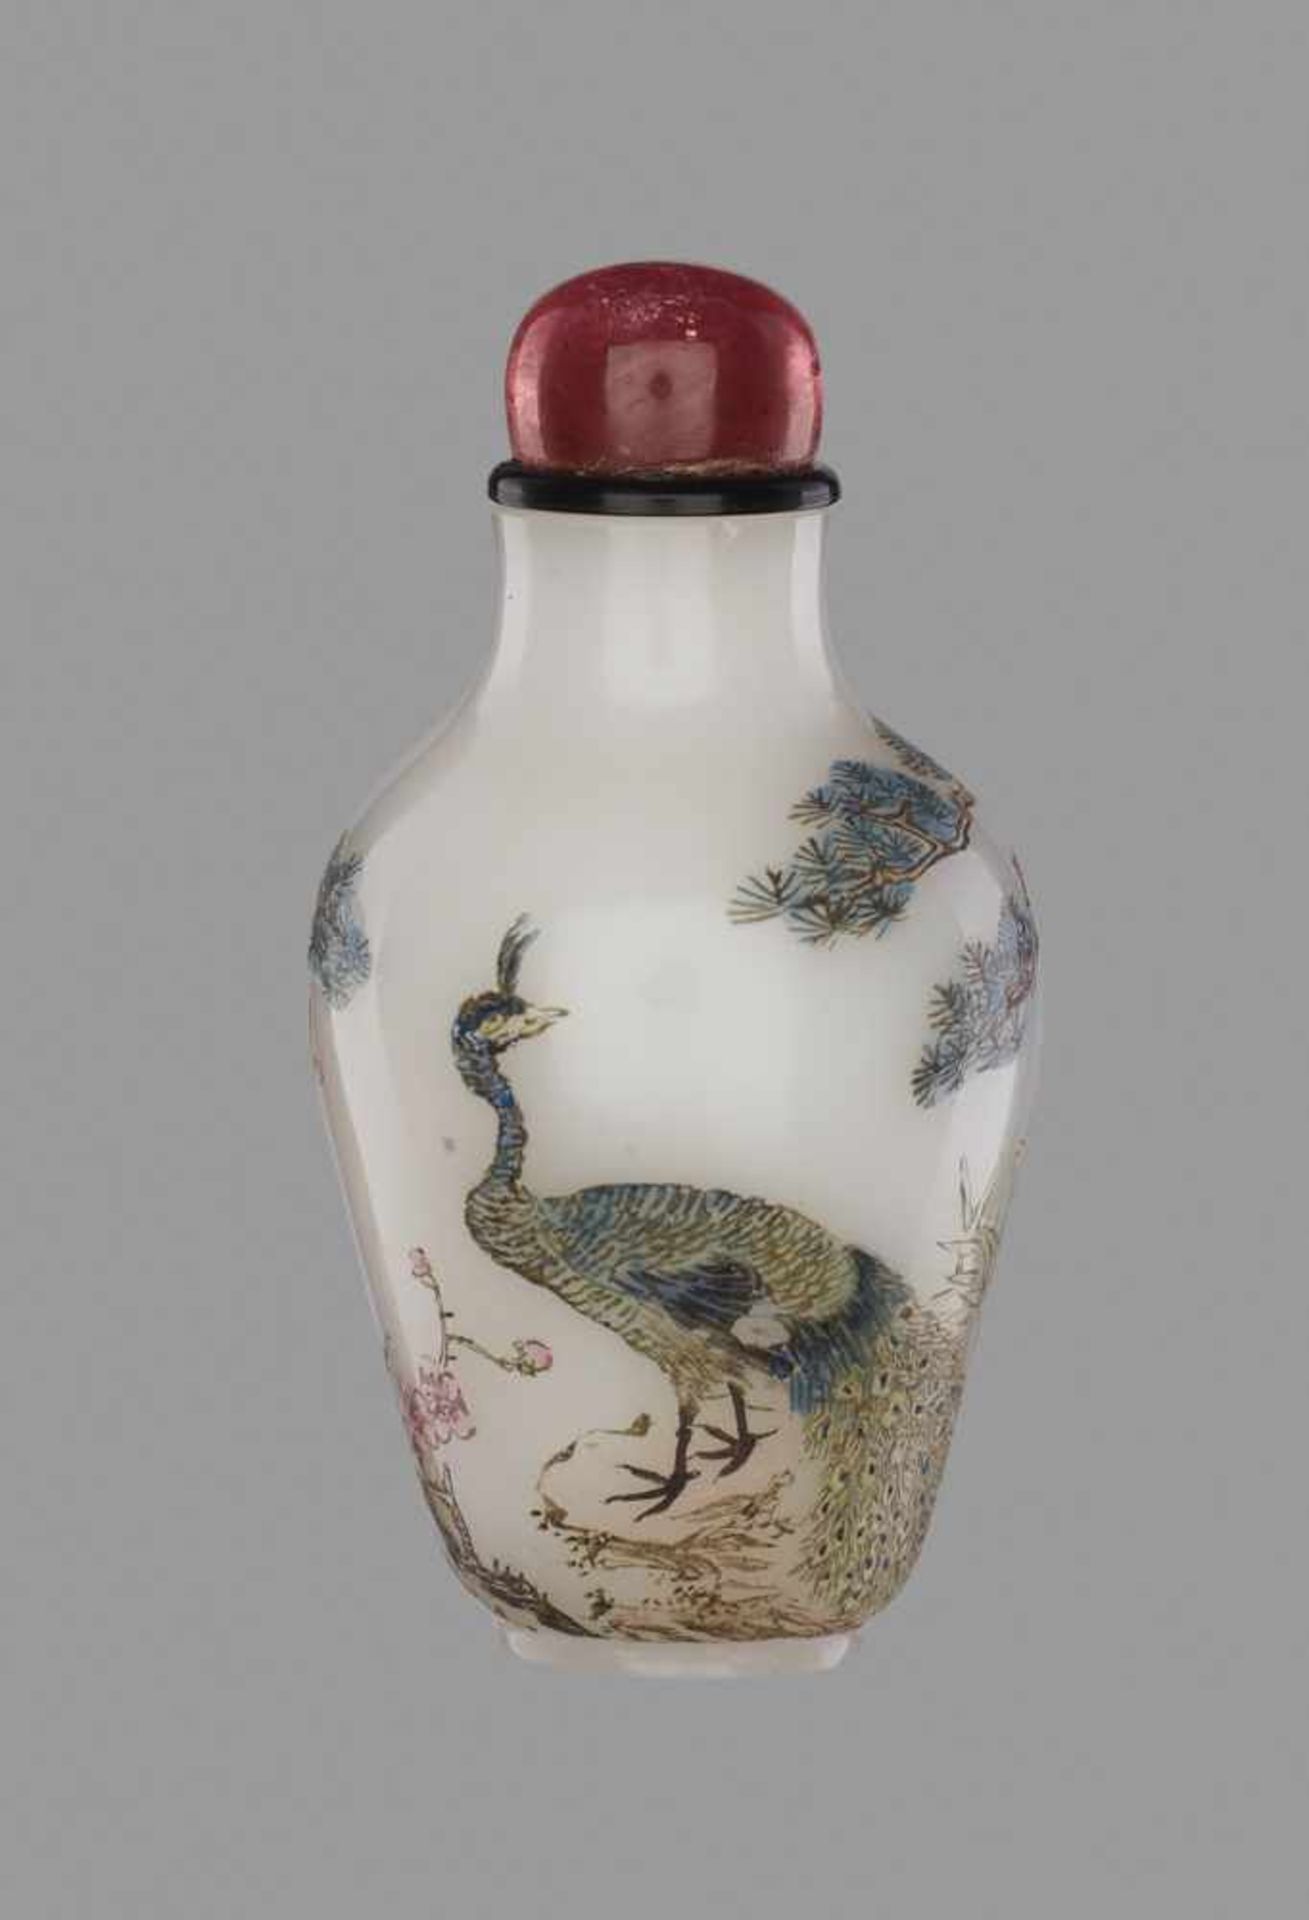 A GUYUE XUAN ‘PEACOCK’ ENAMELED GLASS SNUFF BOTTLE WITH A ‘PEACH’ MARK White opaque glass with